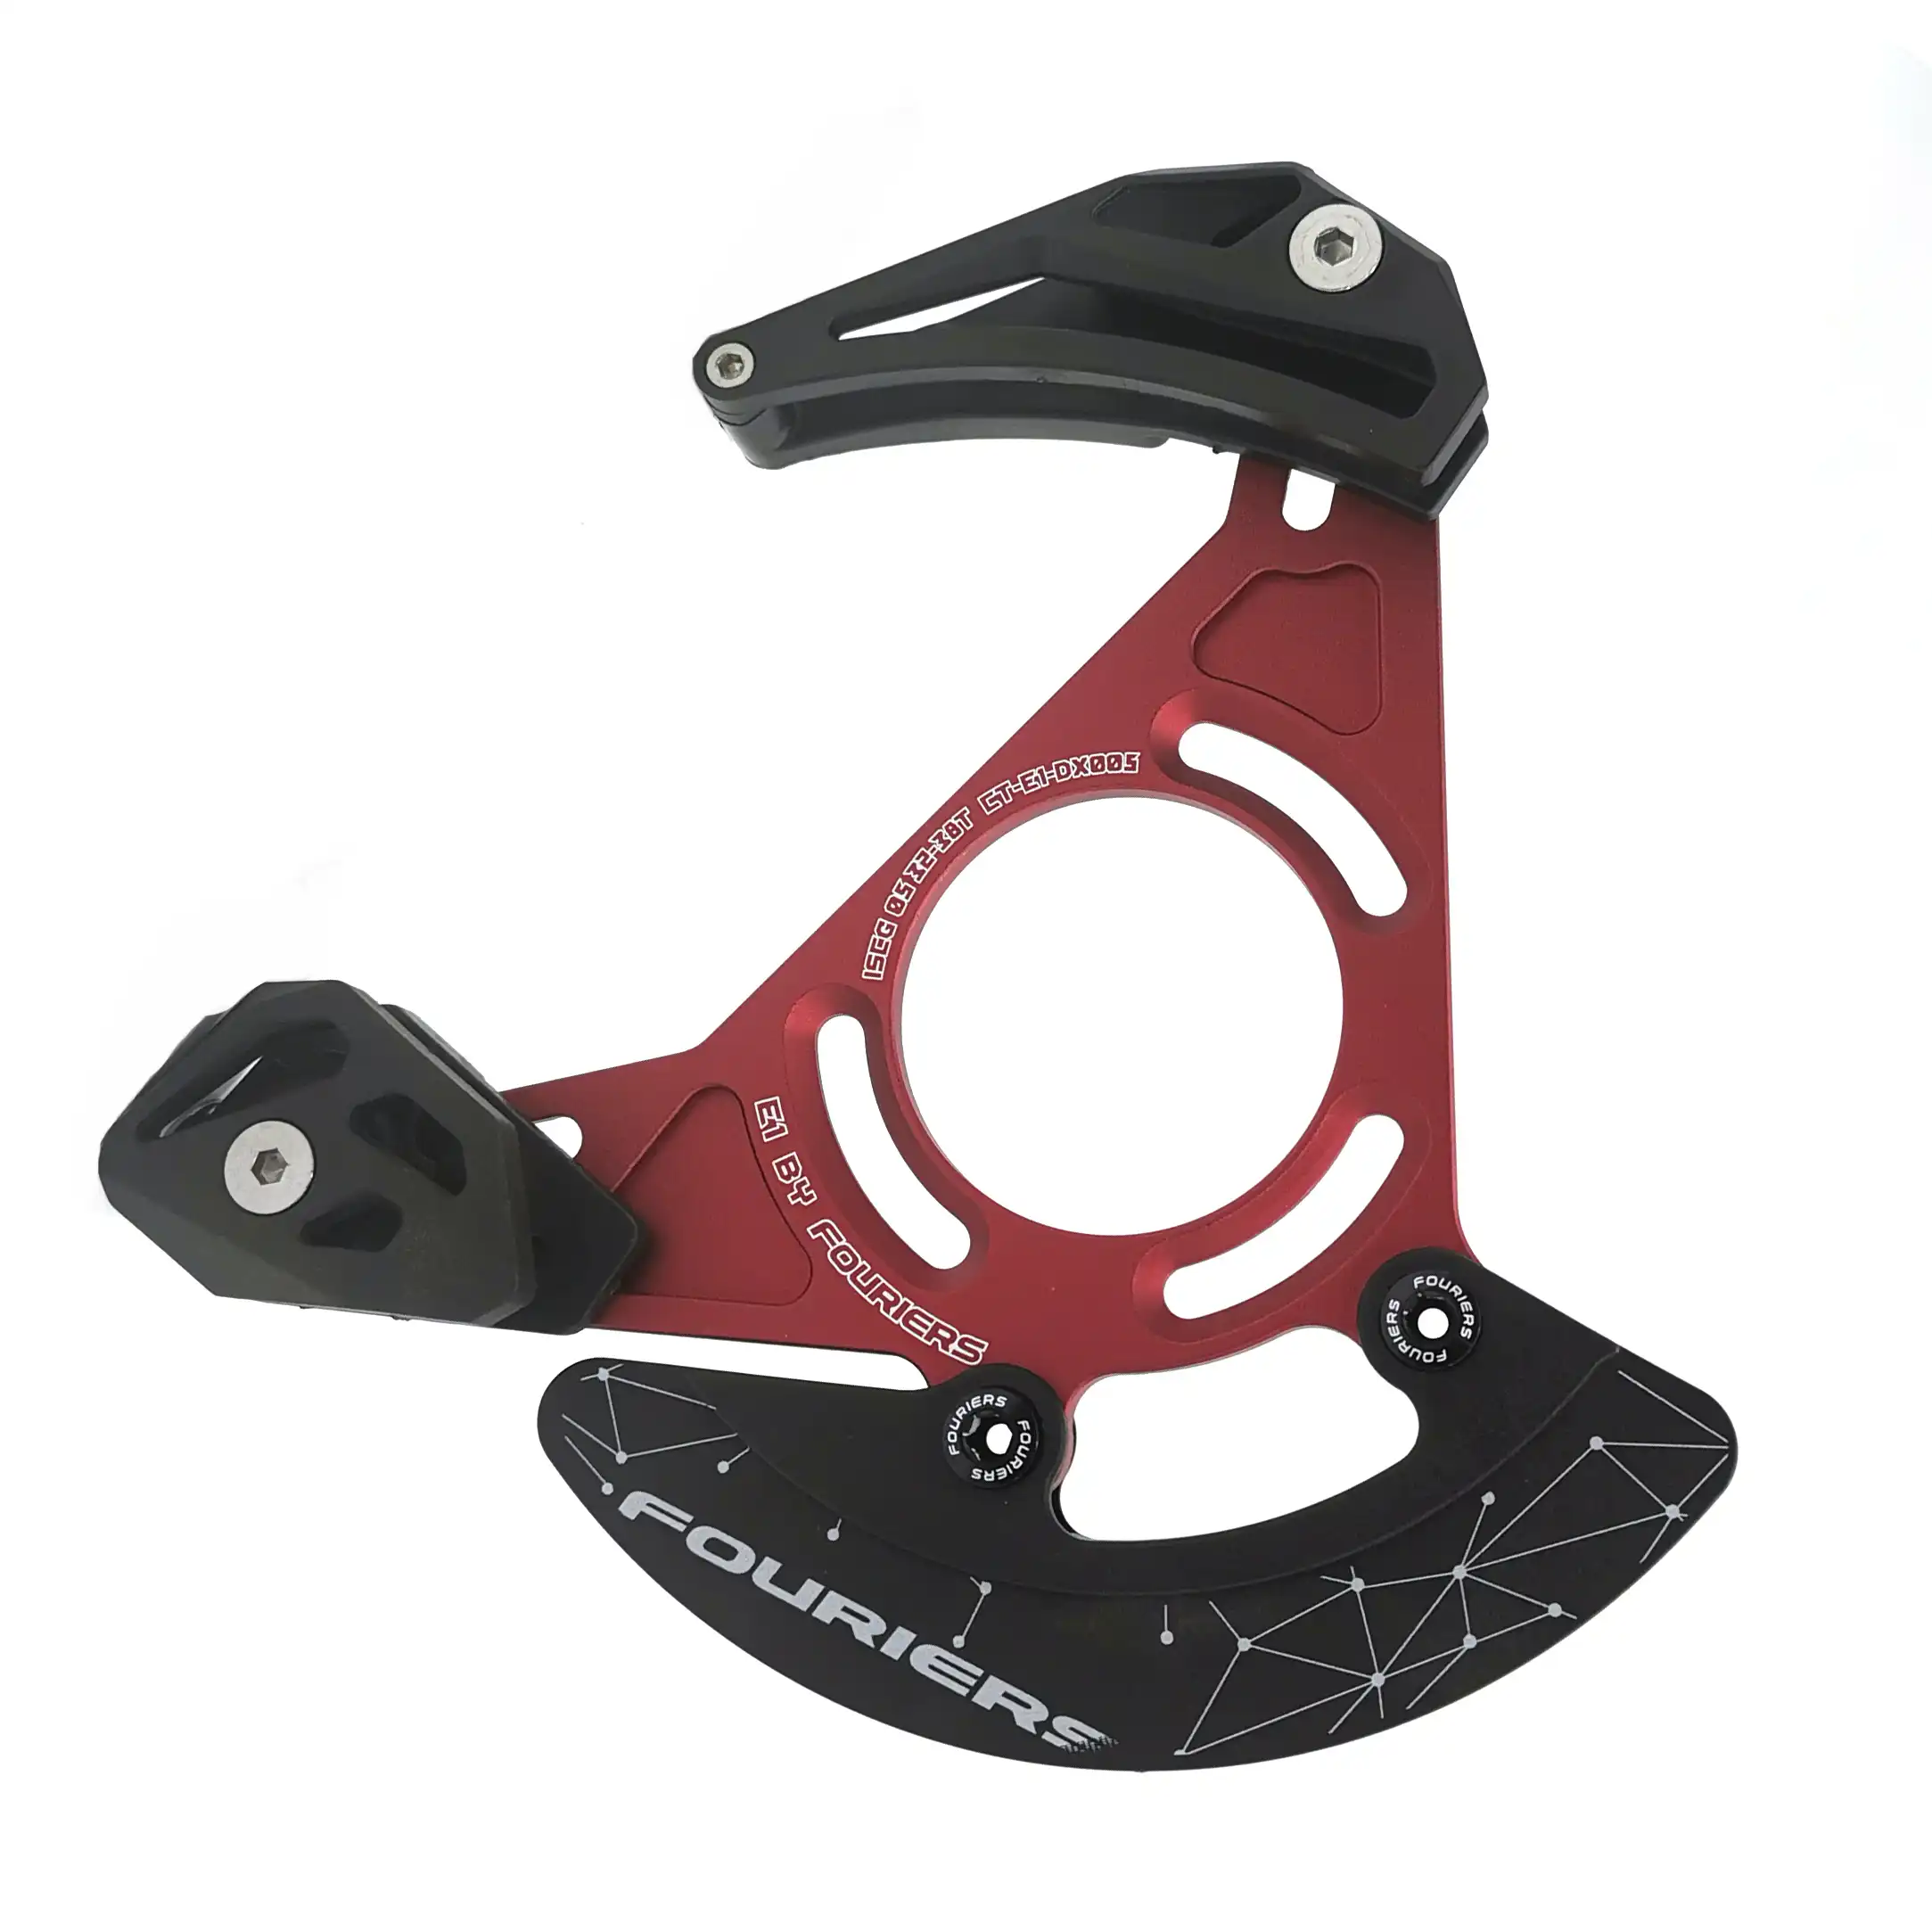 Bike Bicycle Downhill Chain Guide Bash Guards Device Single Speed ISCG05 32t-38t 